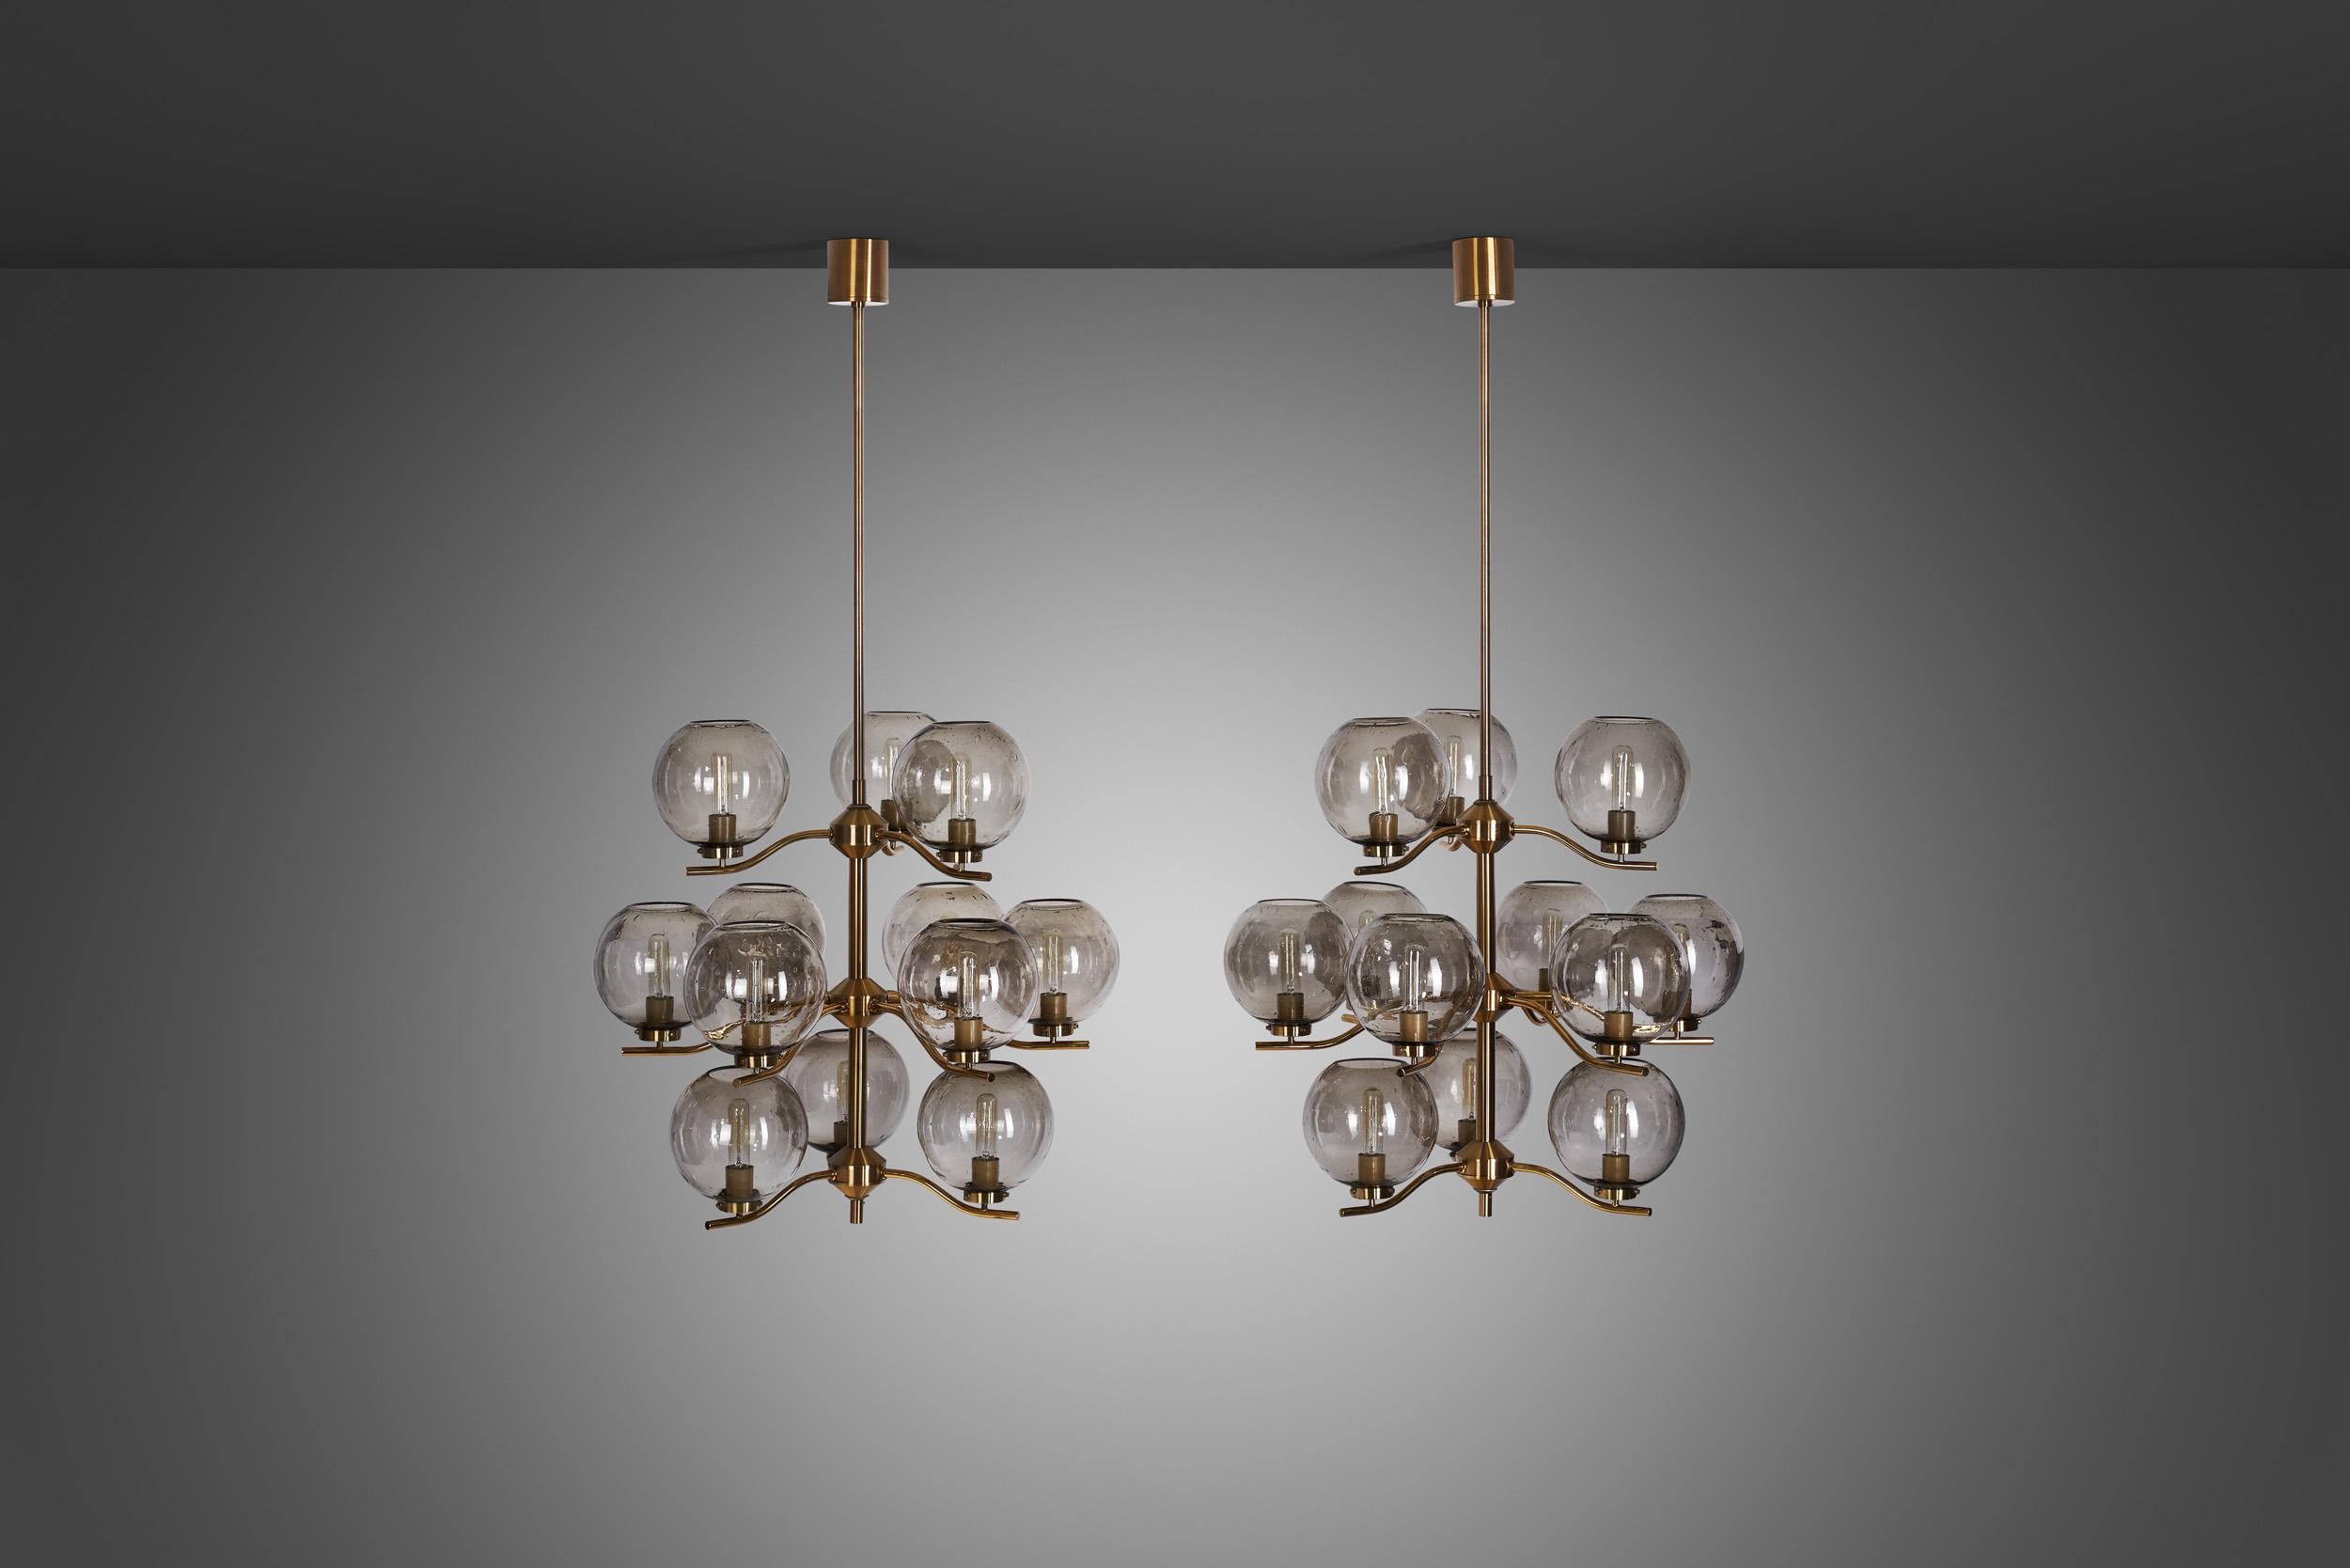 Scandinavian Modern Holger Johansson Chandeliers with 12 Smoked Glass Shades, Sweden 1970s For Sale